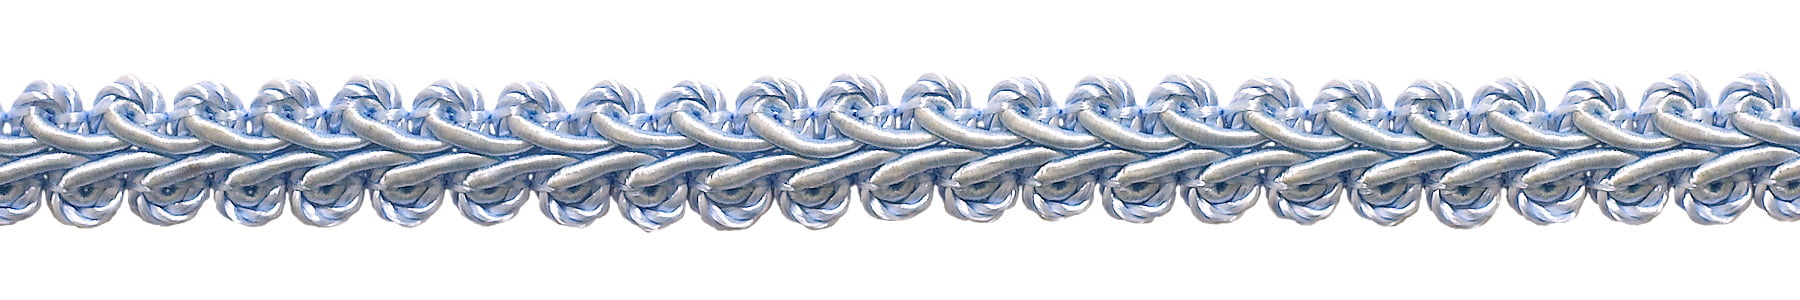 N14 1/2 inch Light Blue Basic Trim French Gimp Braid Sold by The Yard Style# FGS Color: Artic Blue 